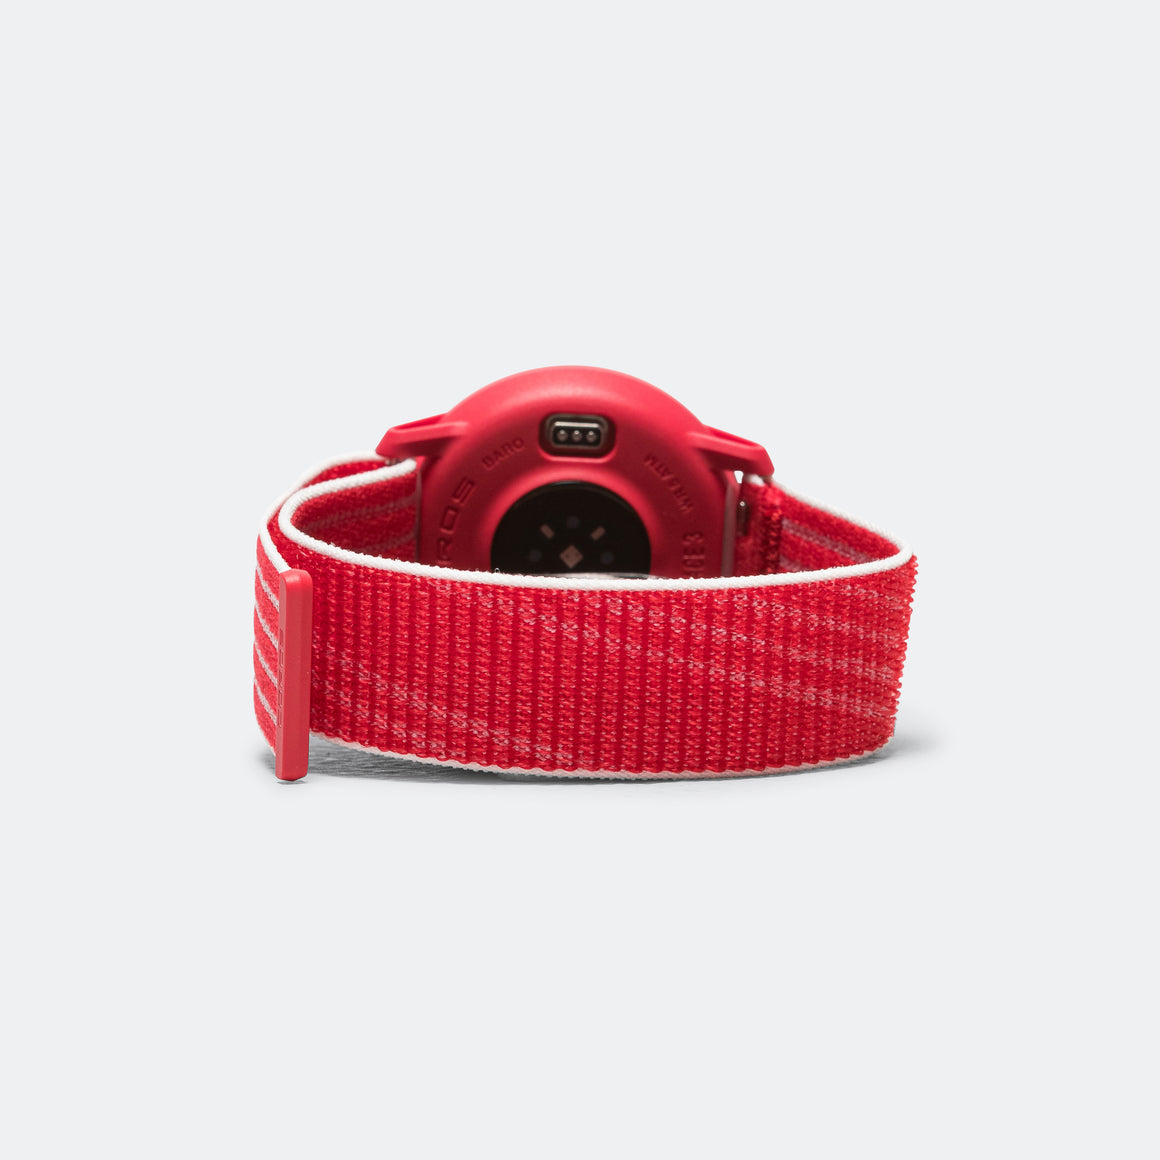 PACE 3 GPS Sports Watch - Track Edition - Red/Nylon